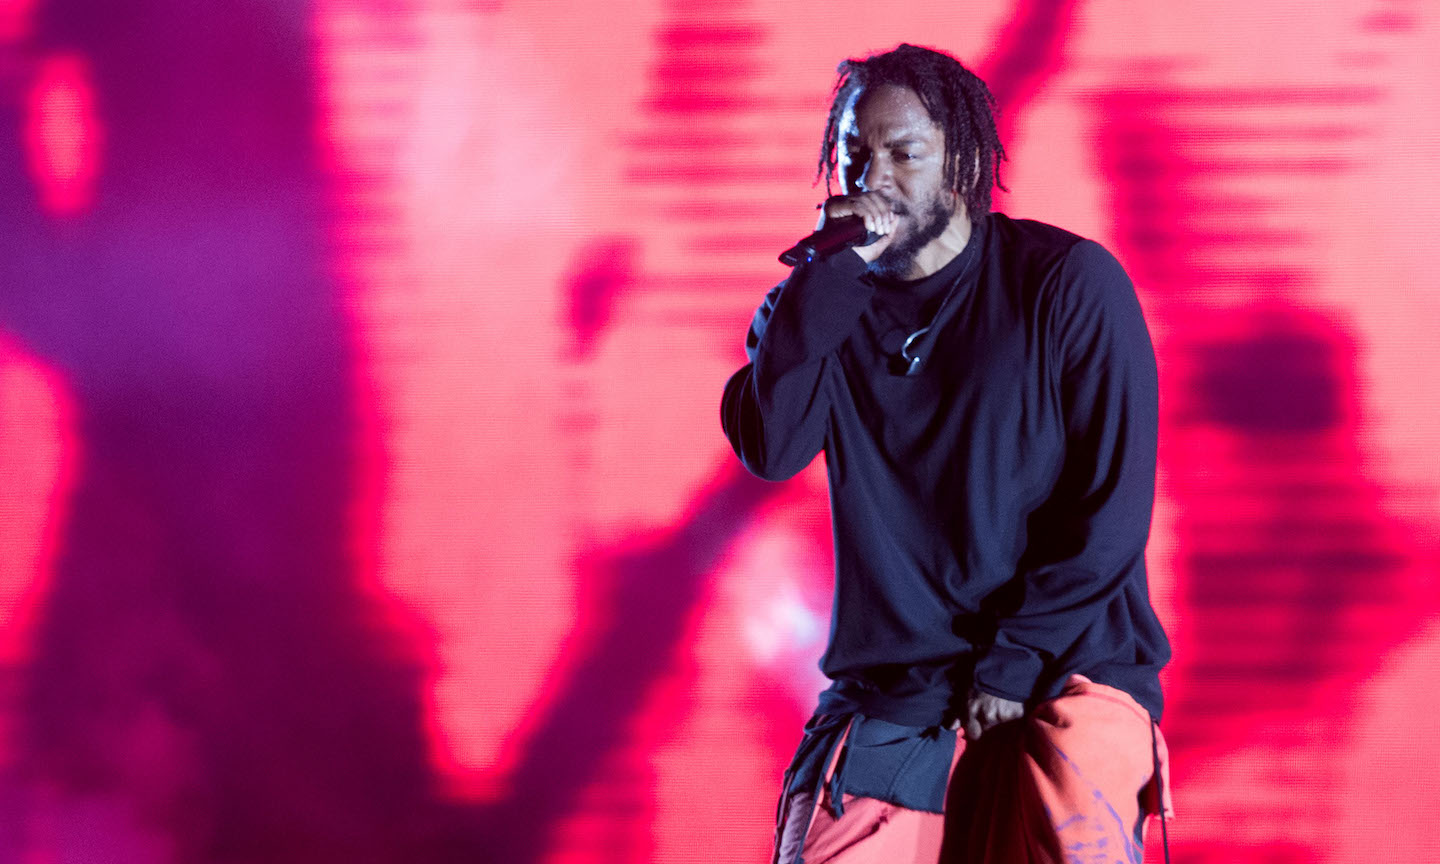 Kendrick Lamar's 'Big Steppers' Tour Is Now the Highest-Grossing Rap Tour  in History